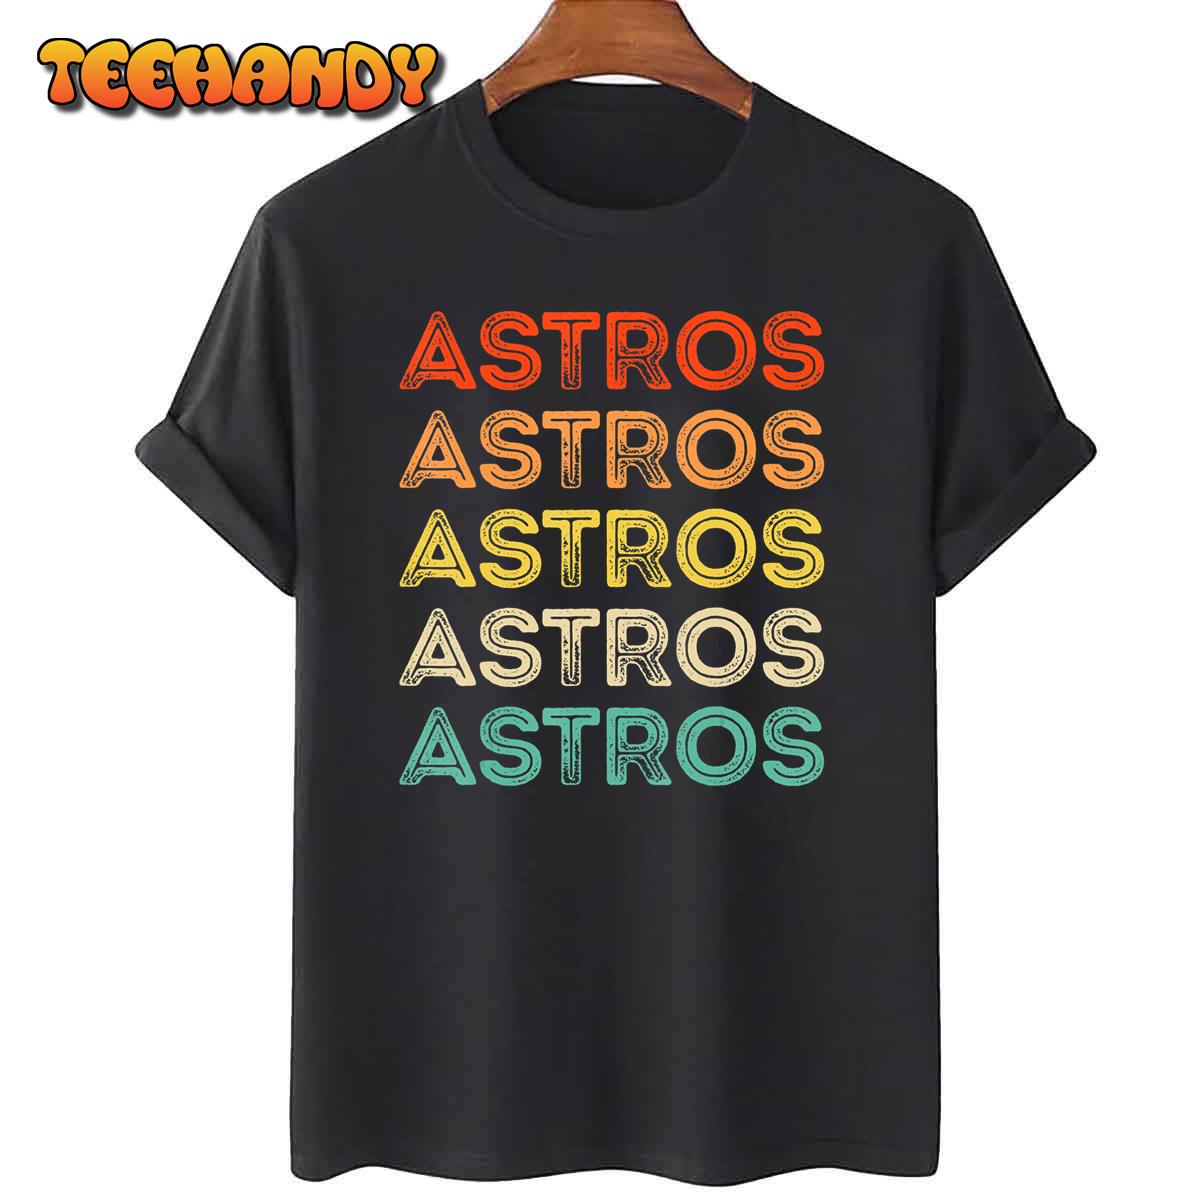 Astros Shirt Womens Dreamcatcher Houston Astros Gift - Personalized Gifts:  Family, Sports, Occasions, Trending